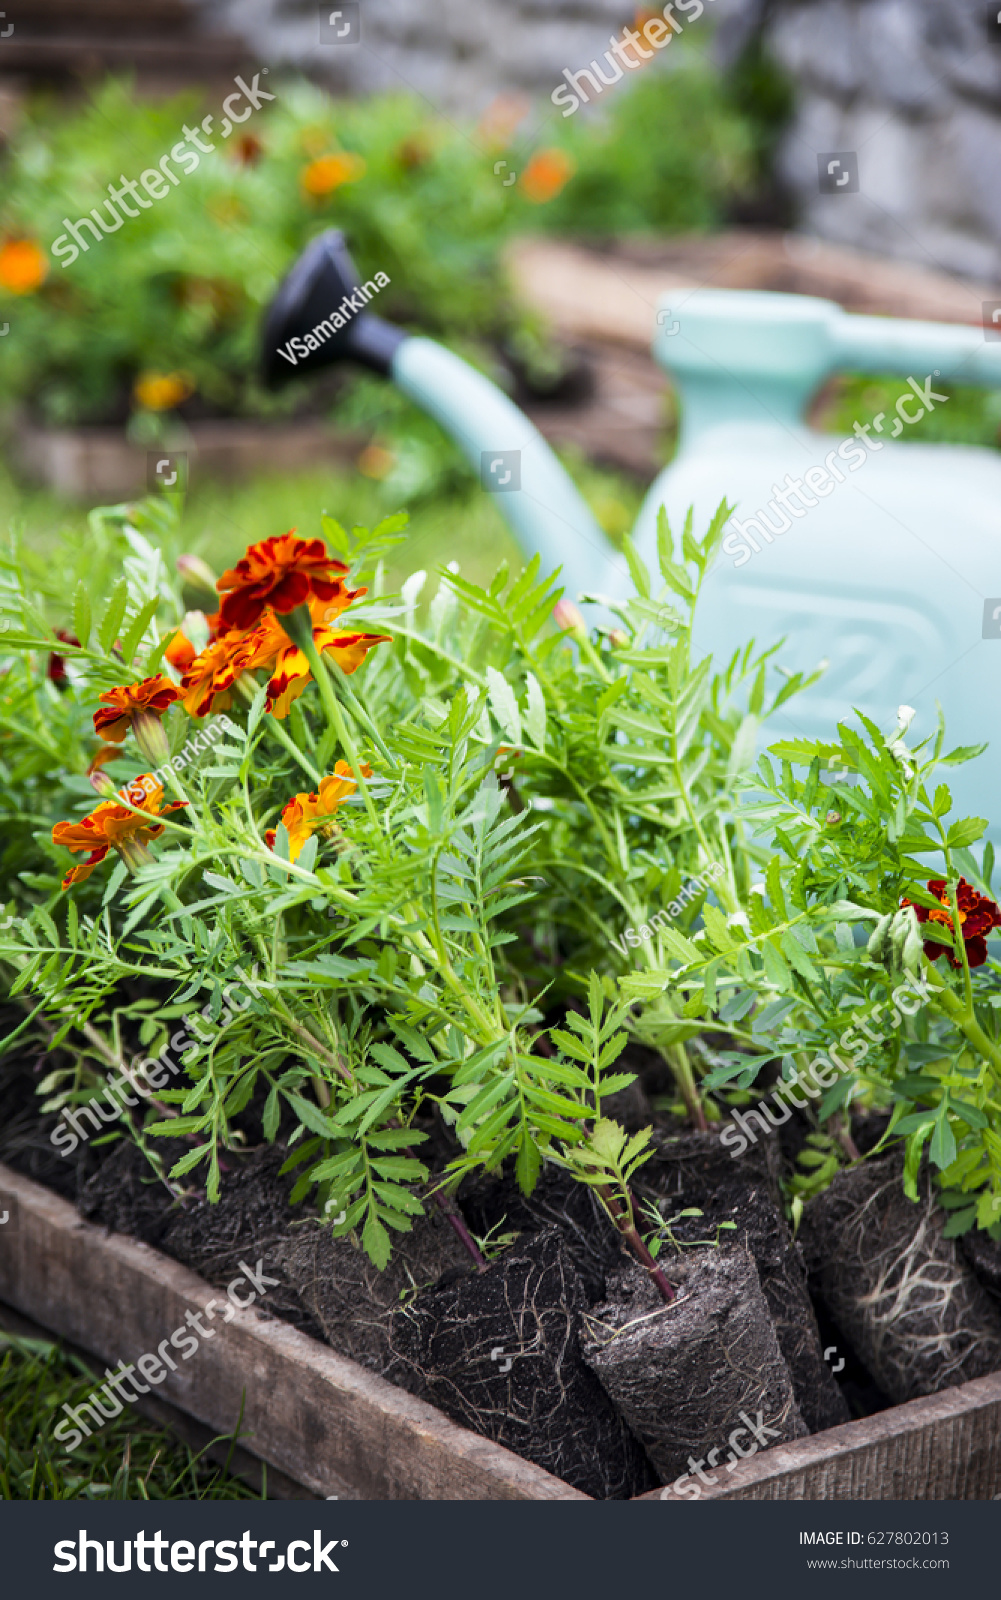 Planting marigolds in a flowerbed with a garden shovel and watering can #627802013